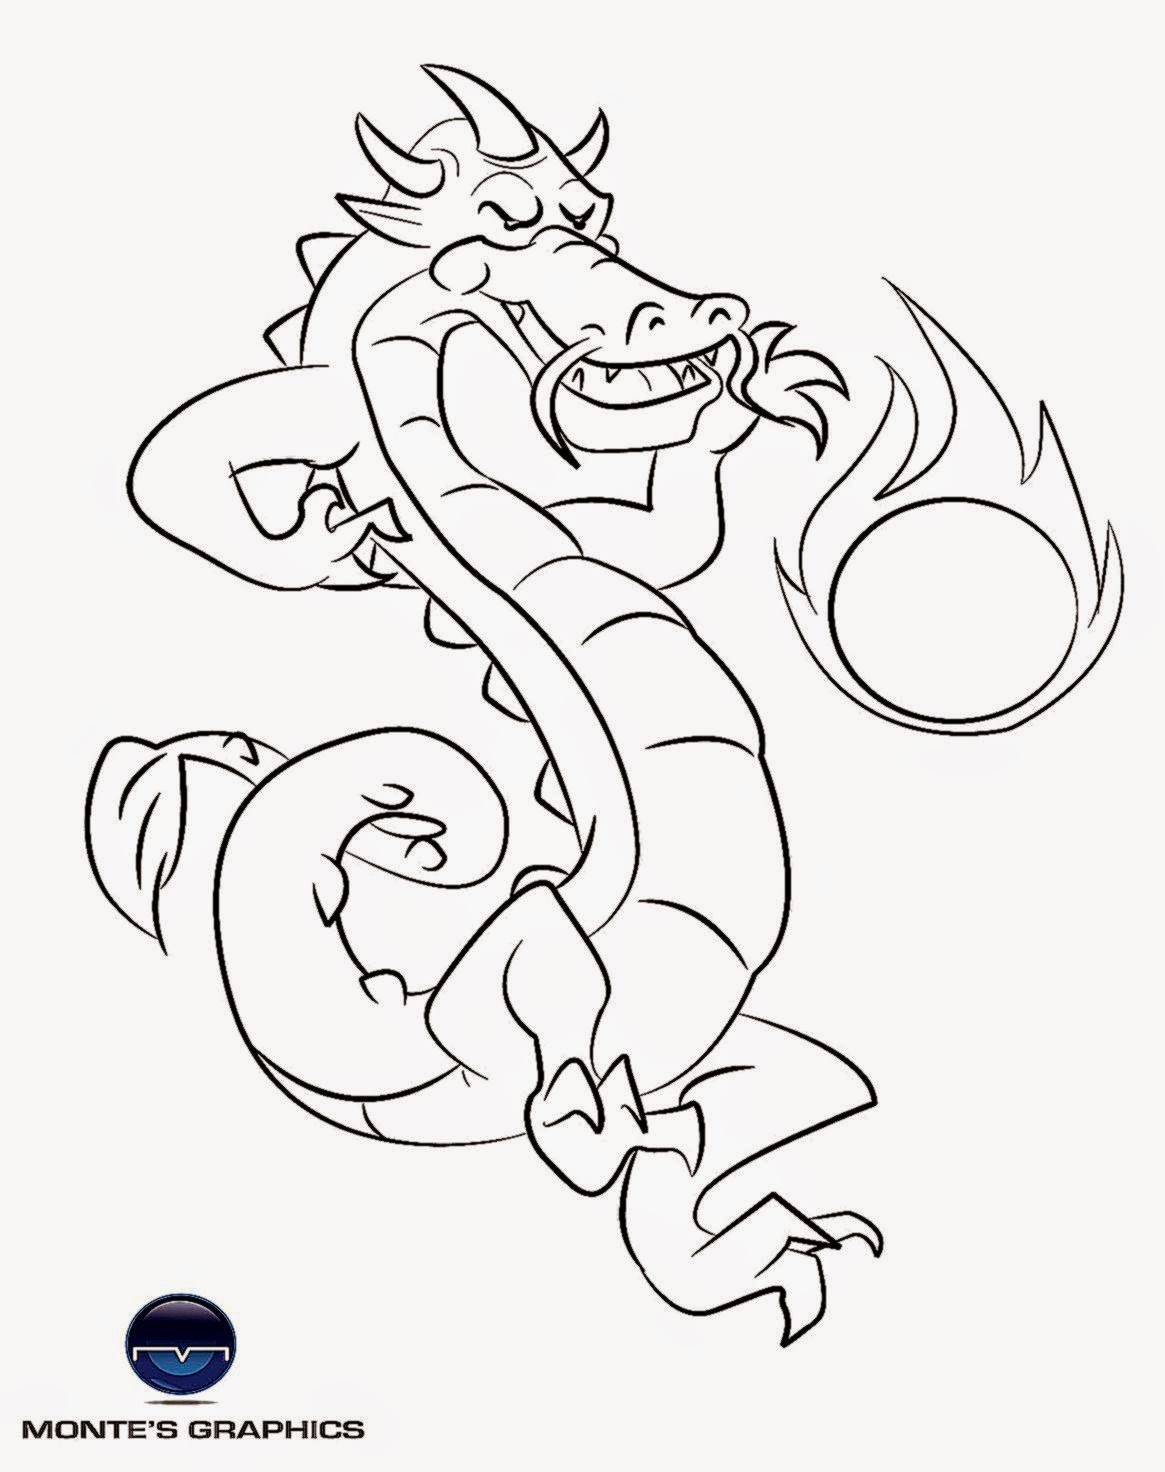 Dragons Coloring Pages For Adults To Print Texas Life!